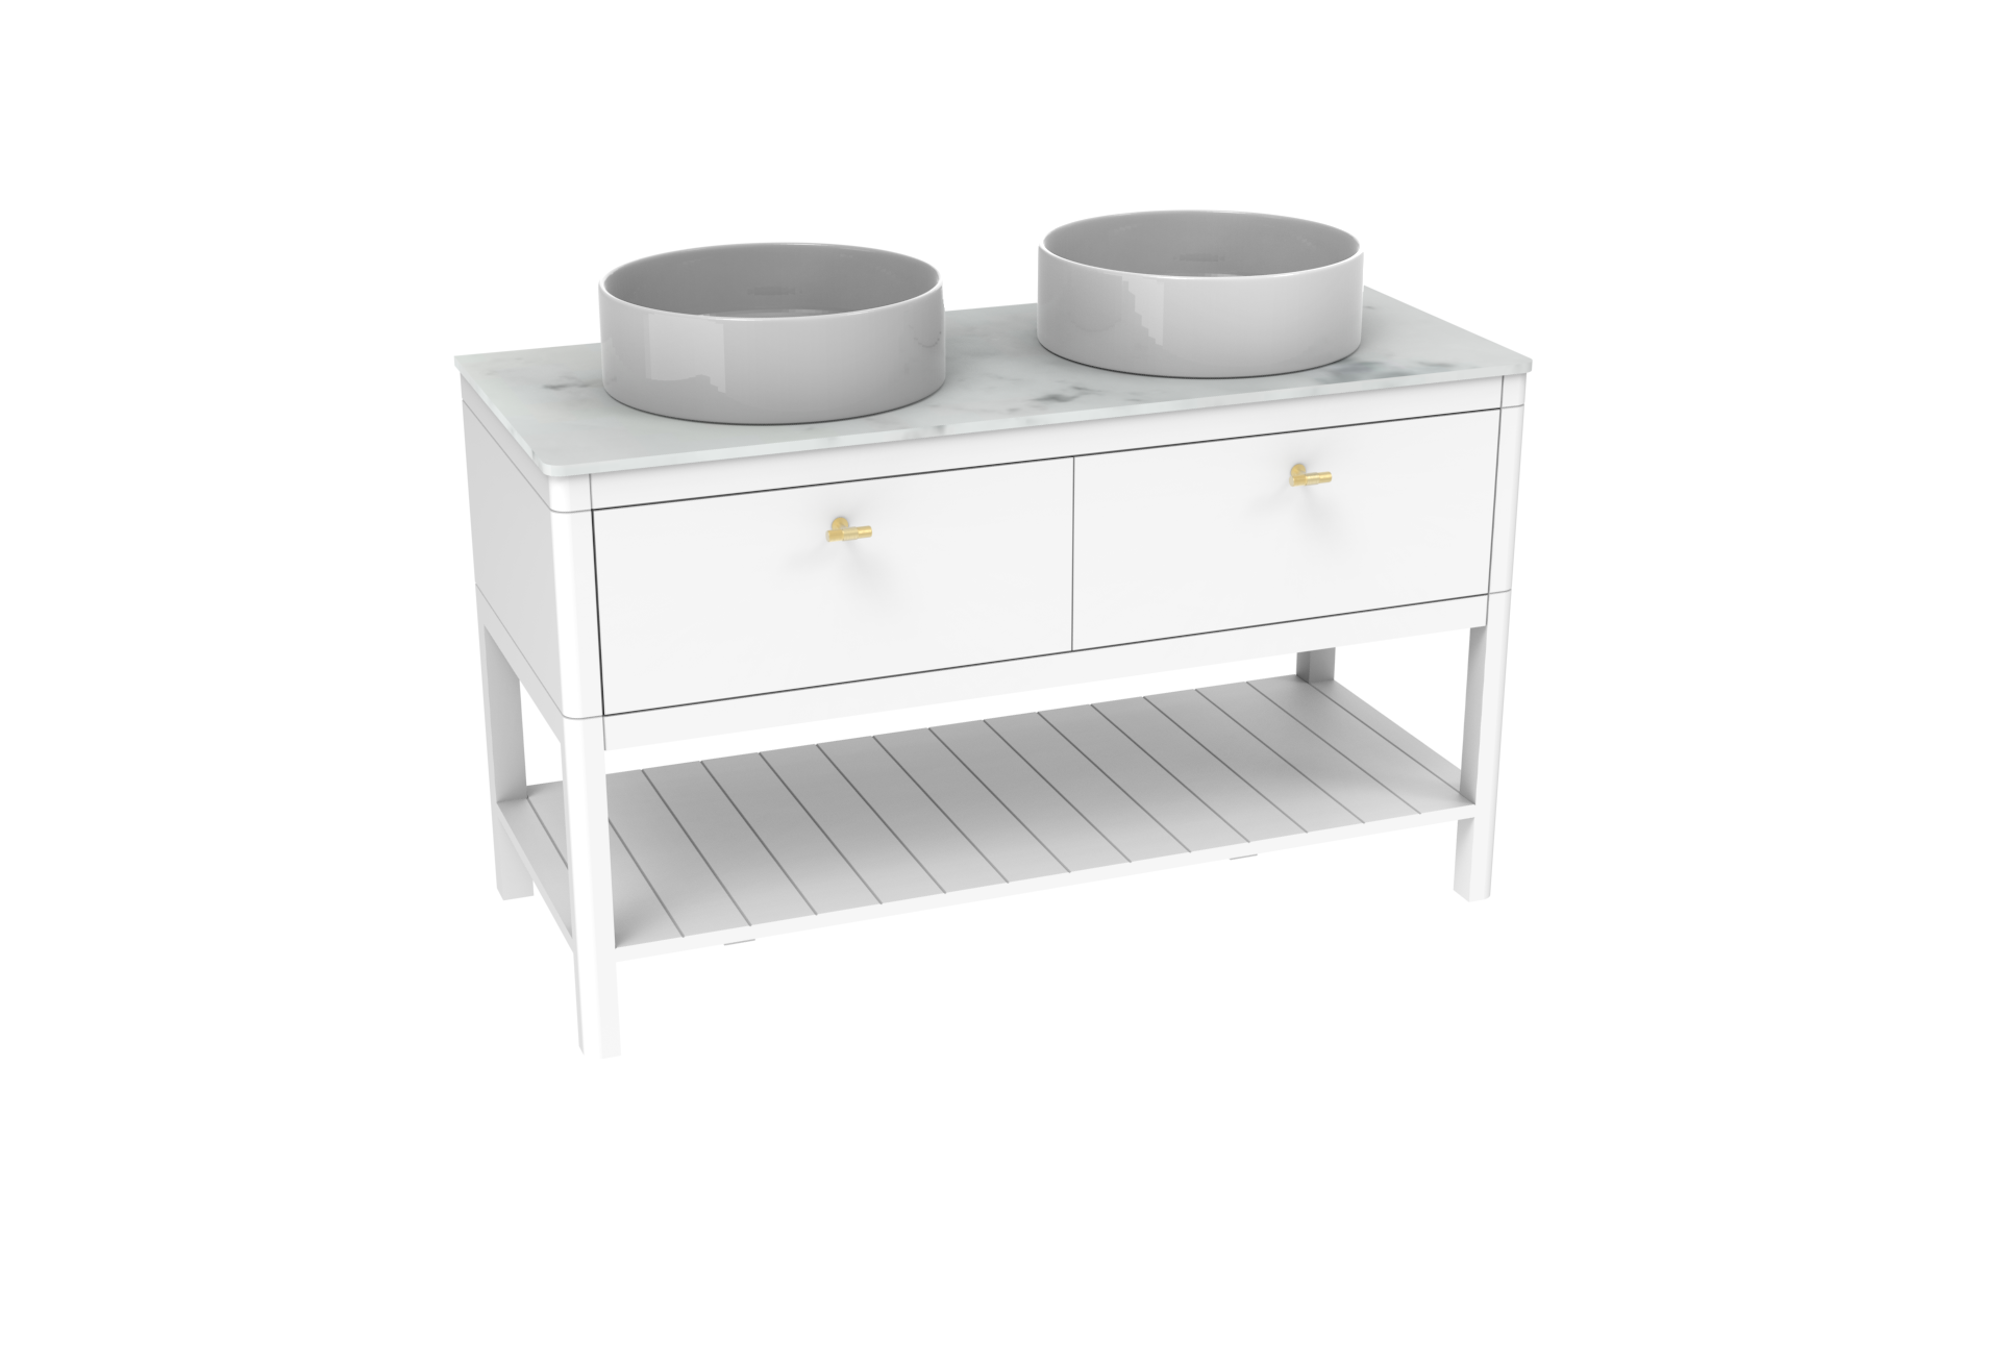 The New FRONTIER 120cm 2 drawer floor standing unit with undermount tray- Matte White